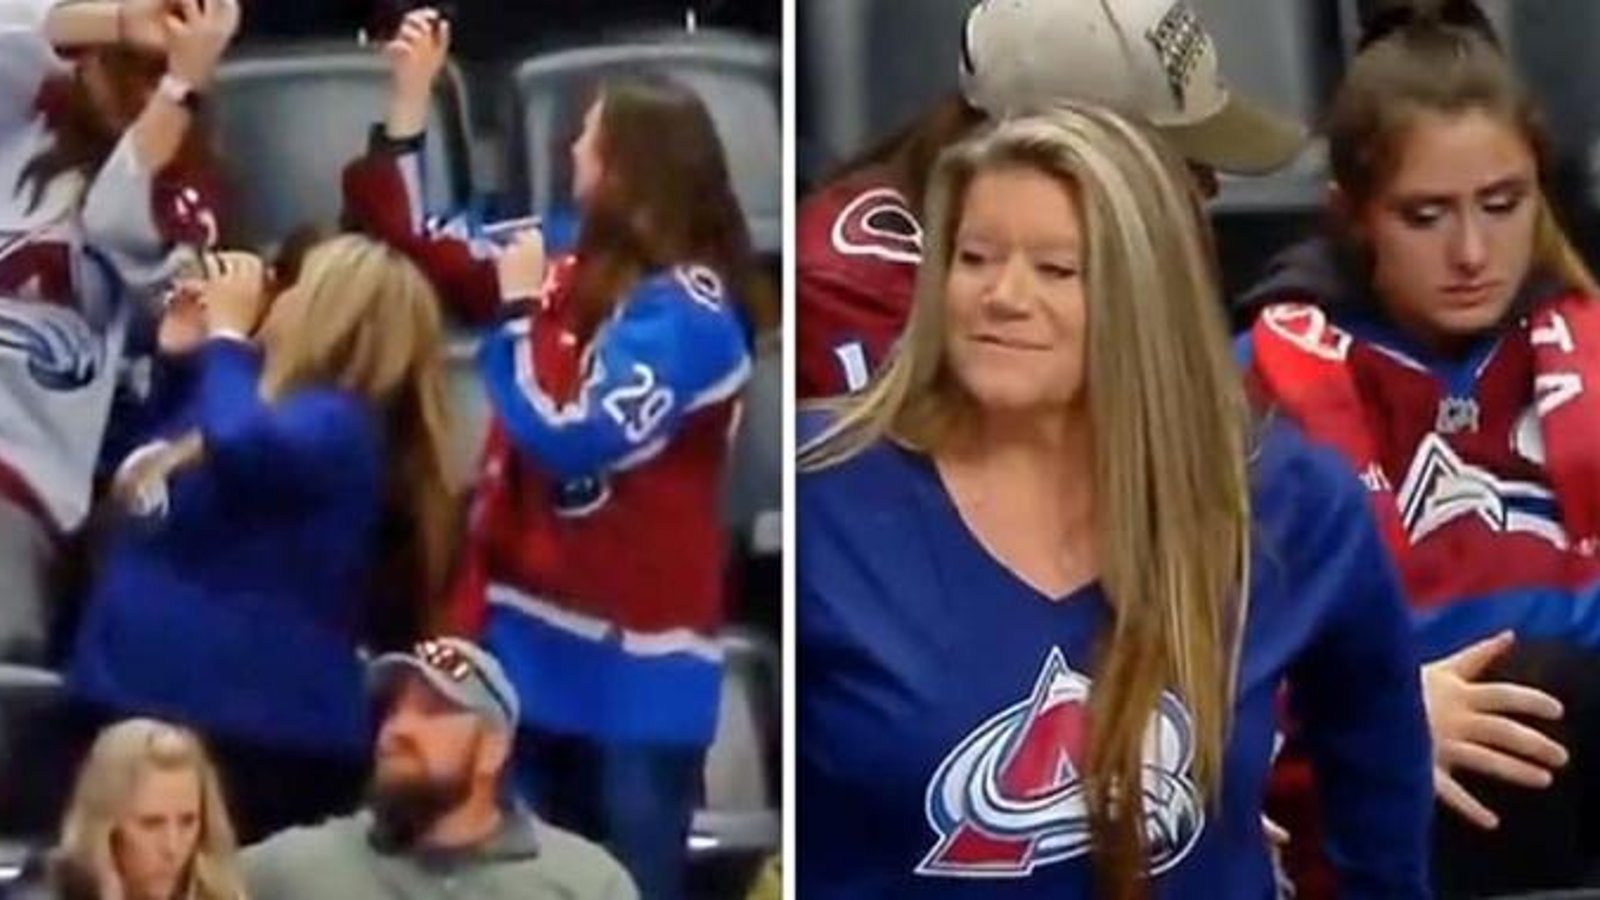 Surprising twist: the Avalanche fan is NOT the worst boyfriend in puck-catching incident! 